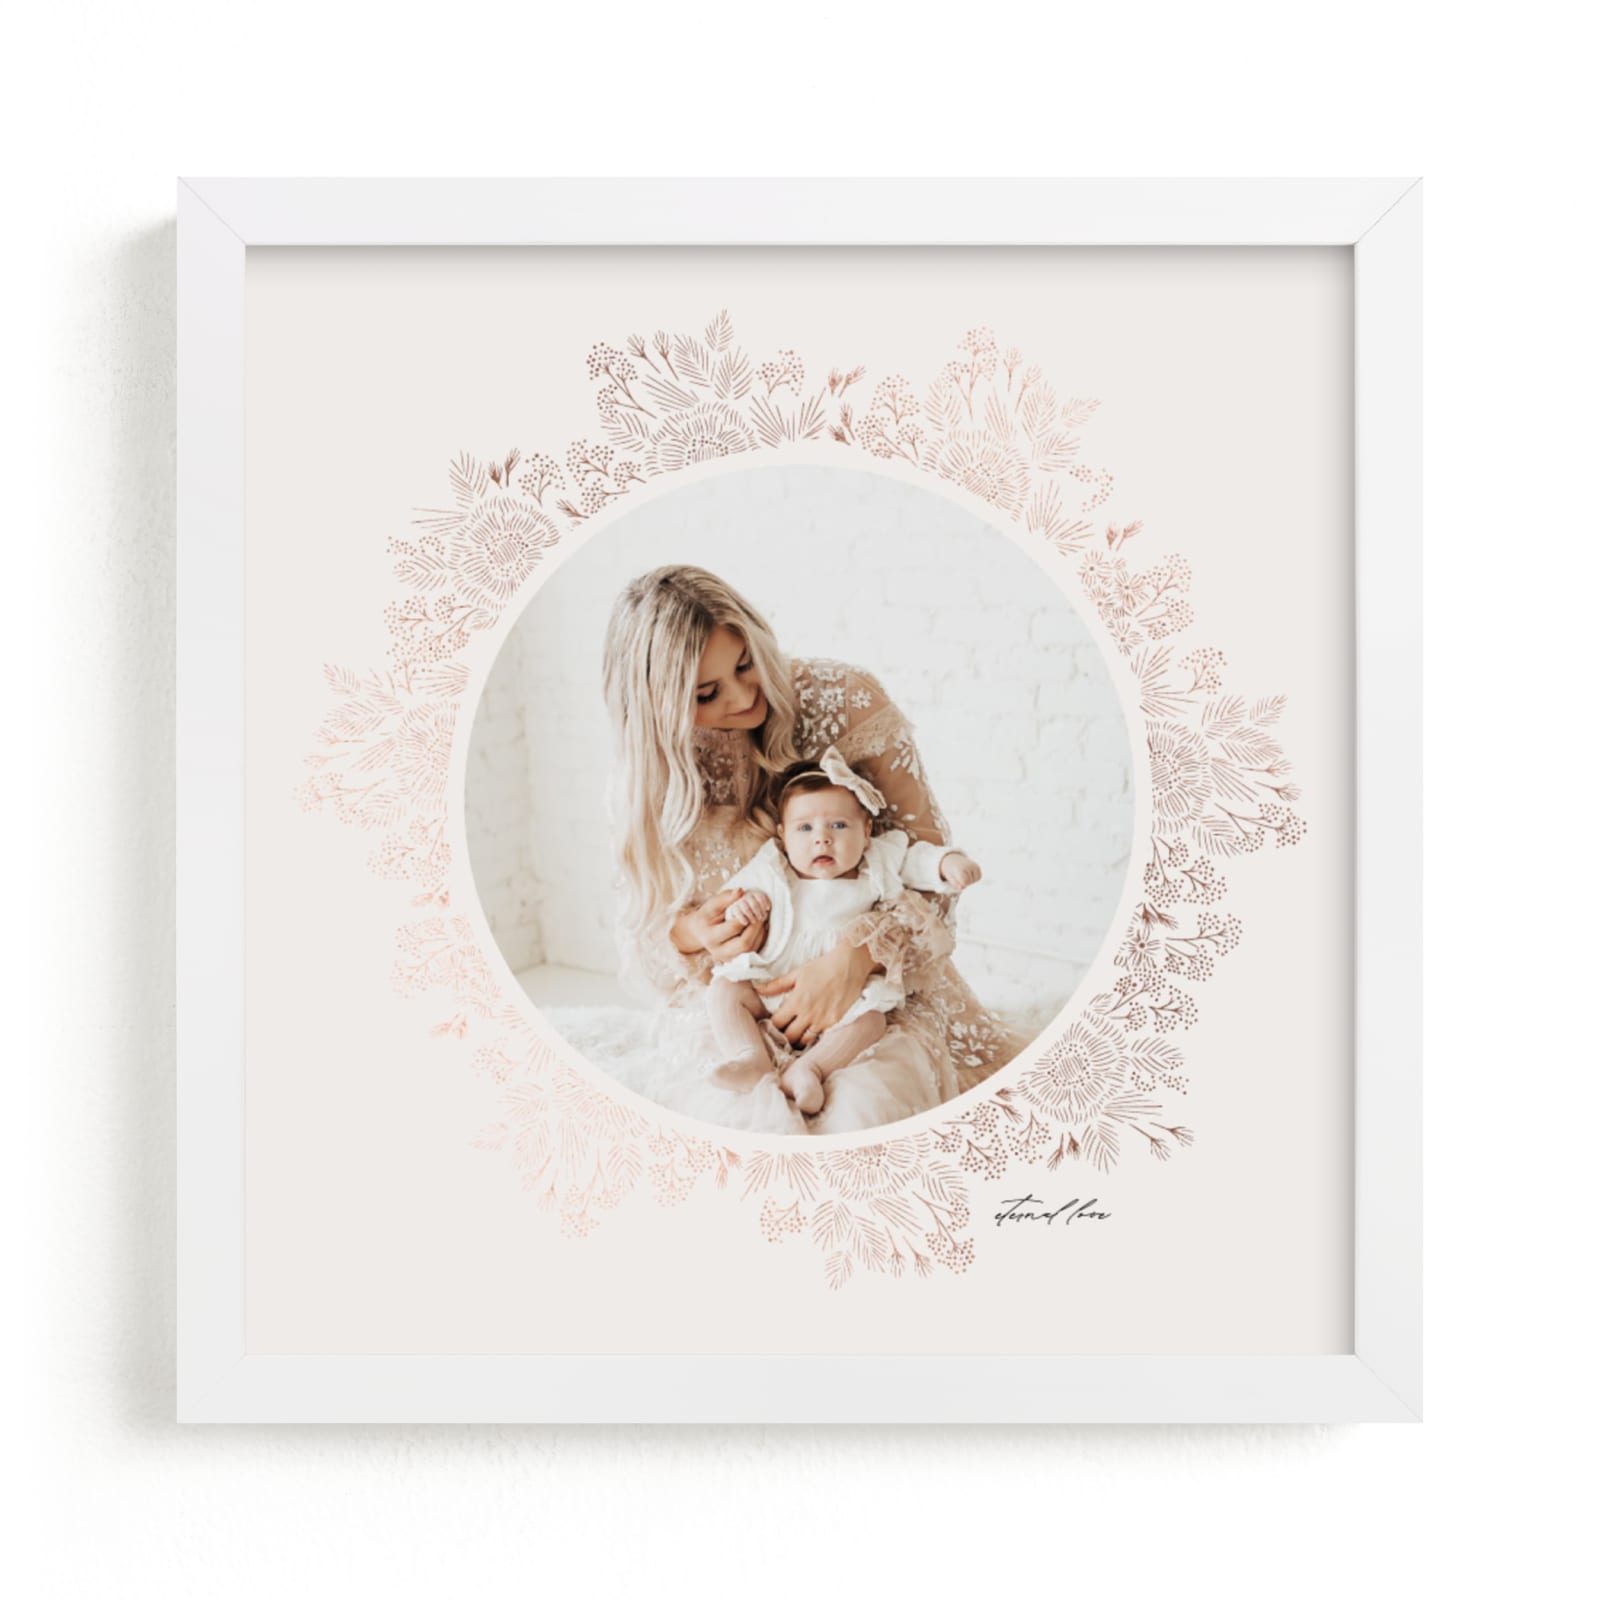 This is a ivory foil stamped photo art by Tamara Hilje called Gilded Blooms.